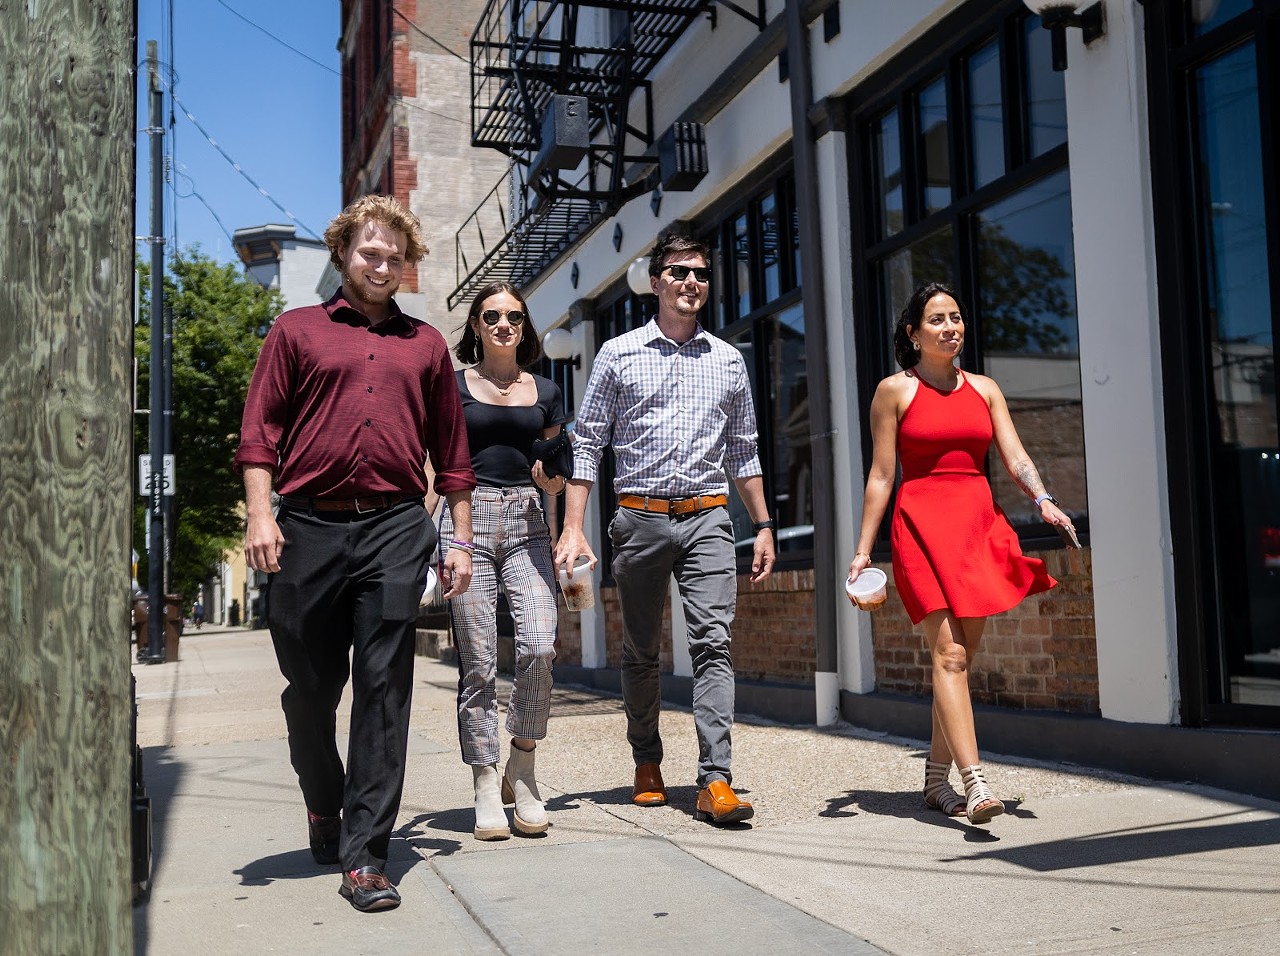 A group of information technology workers at Resolvit, LLC, walk back to work near Washington Park. Only one of the workers is originally from the city (far left), whereas two other members (middle right and far right) have moved here for work and the last member (middle left) is visiting for work.